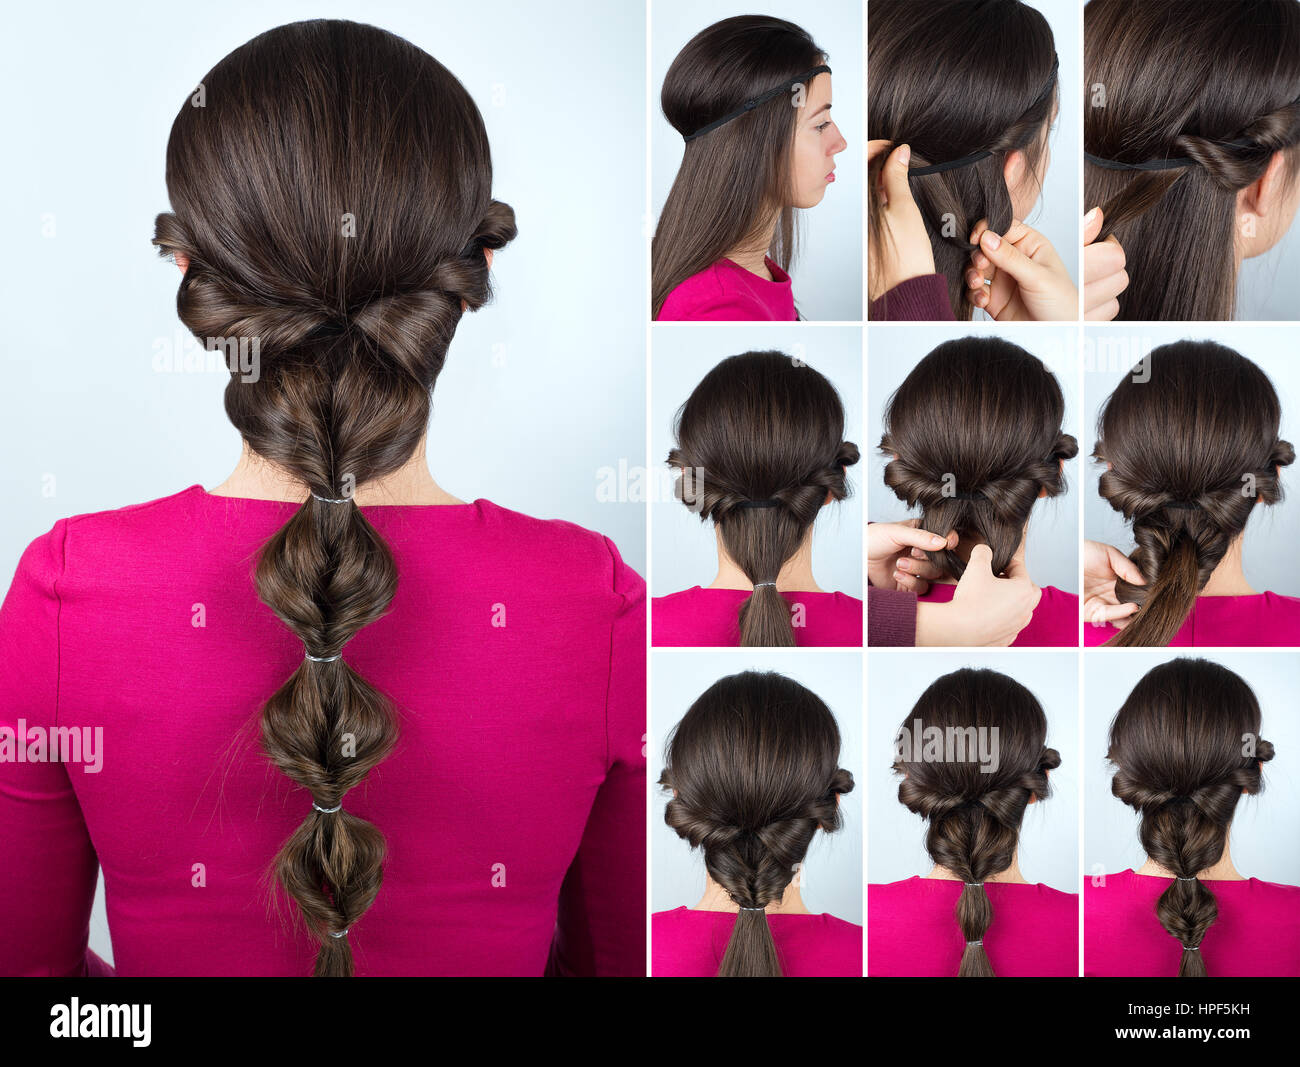 simple greek hairstyle twisted ponytail tutorial. Hairstyle tutorial for long  hair. Hair tutorial step by step. Hairstyle for party Stock Photo - Alamy